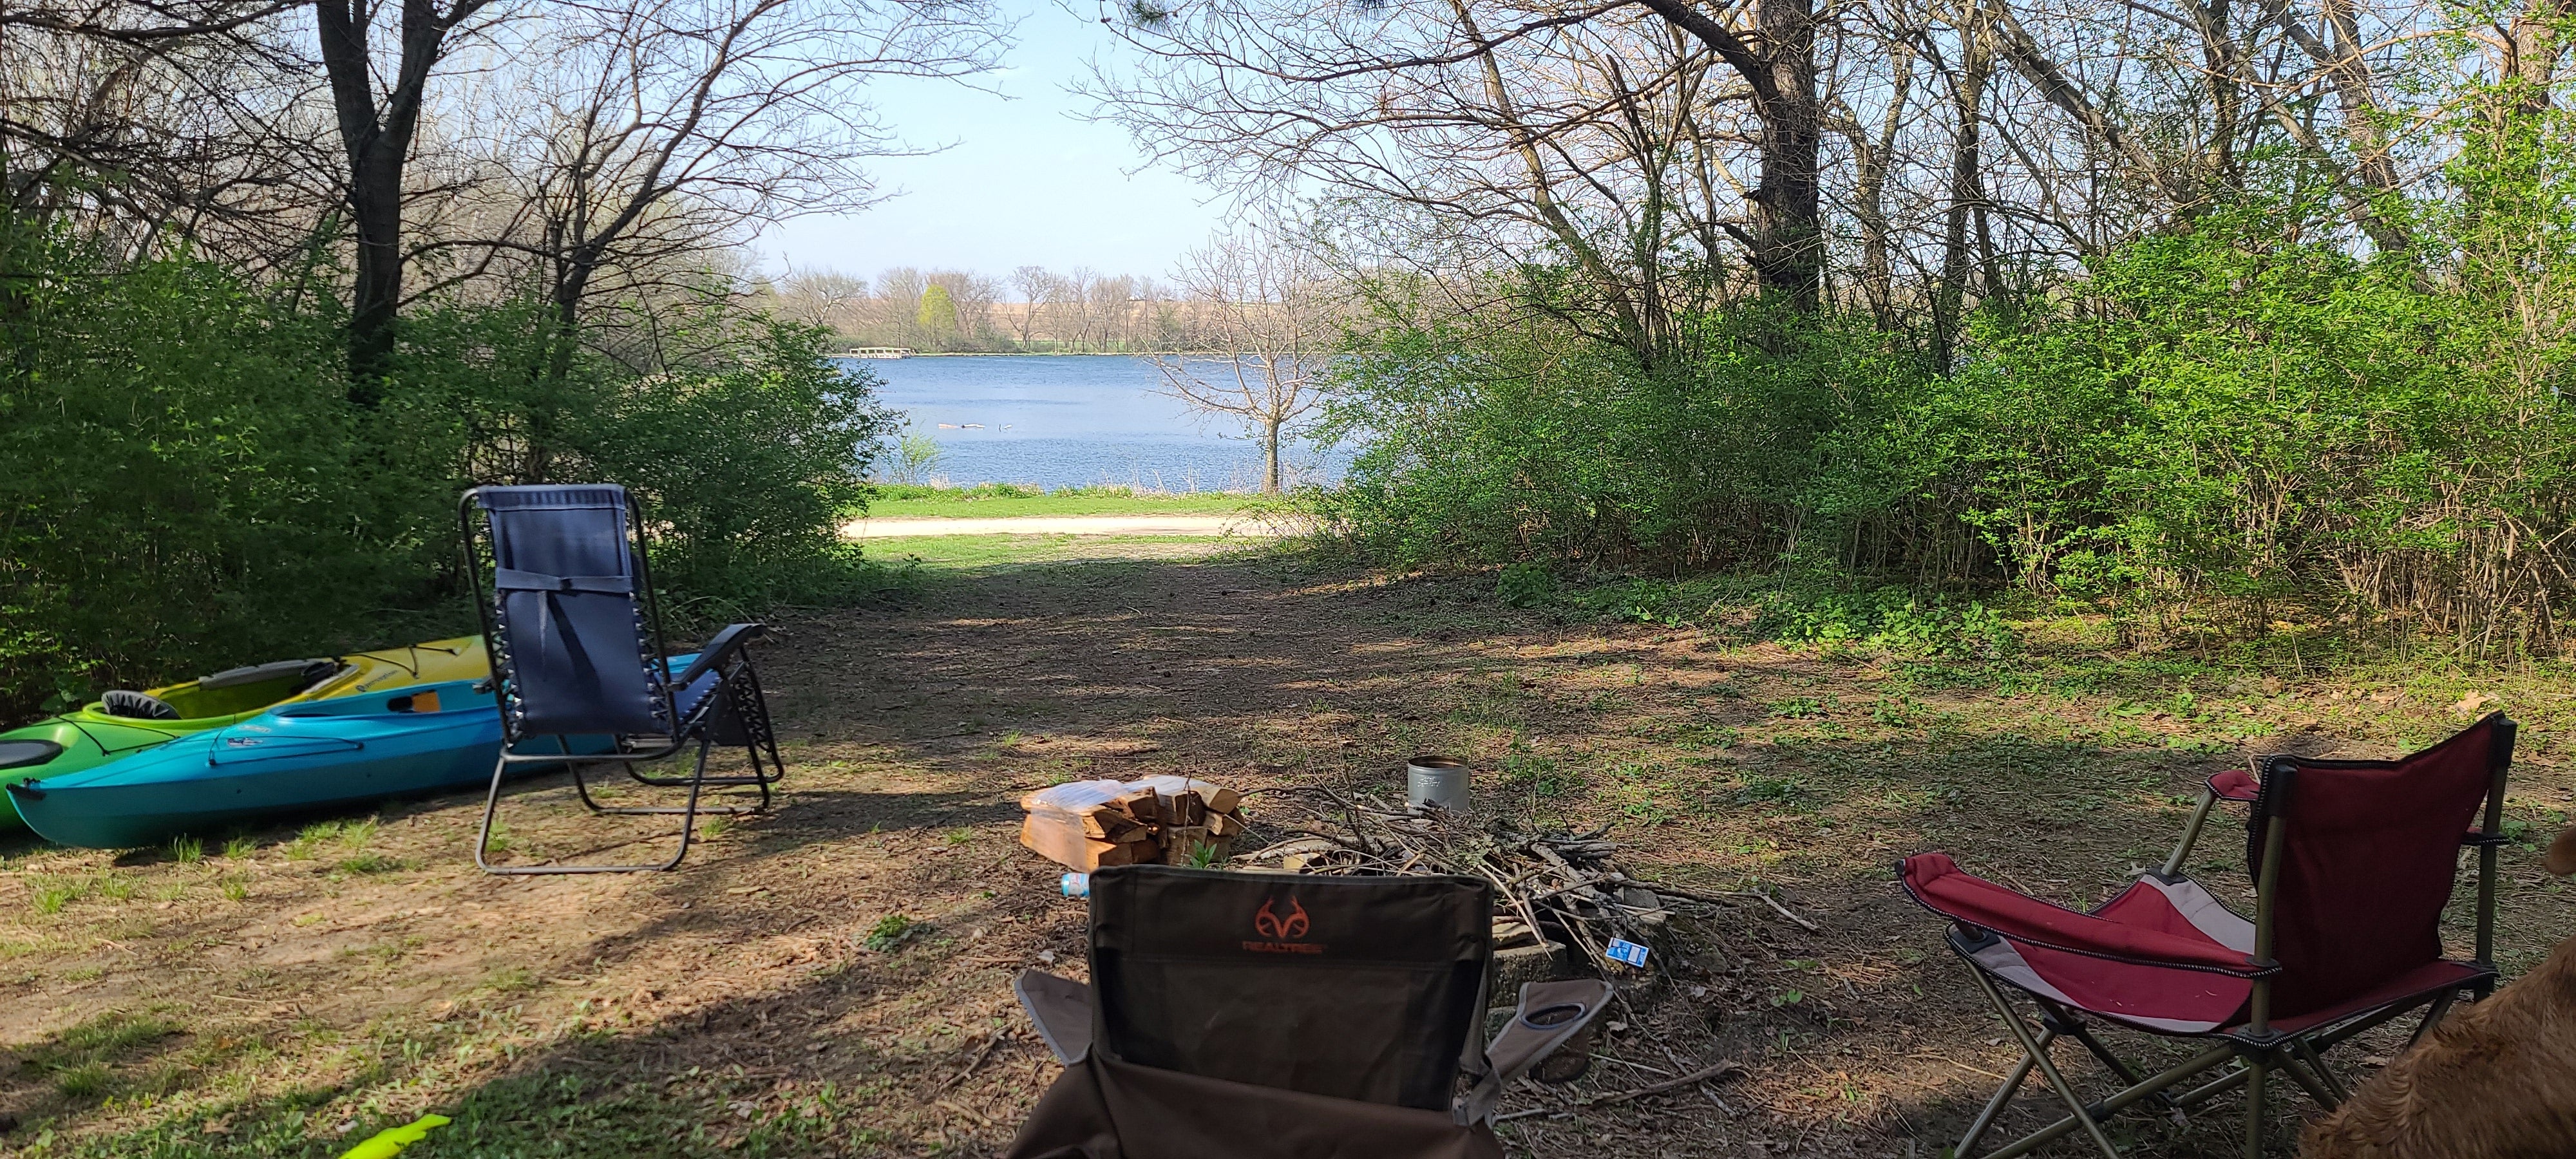 Camper submitted image from Worthington Sportsman's Club - Members Only - 3